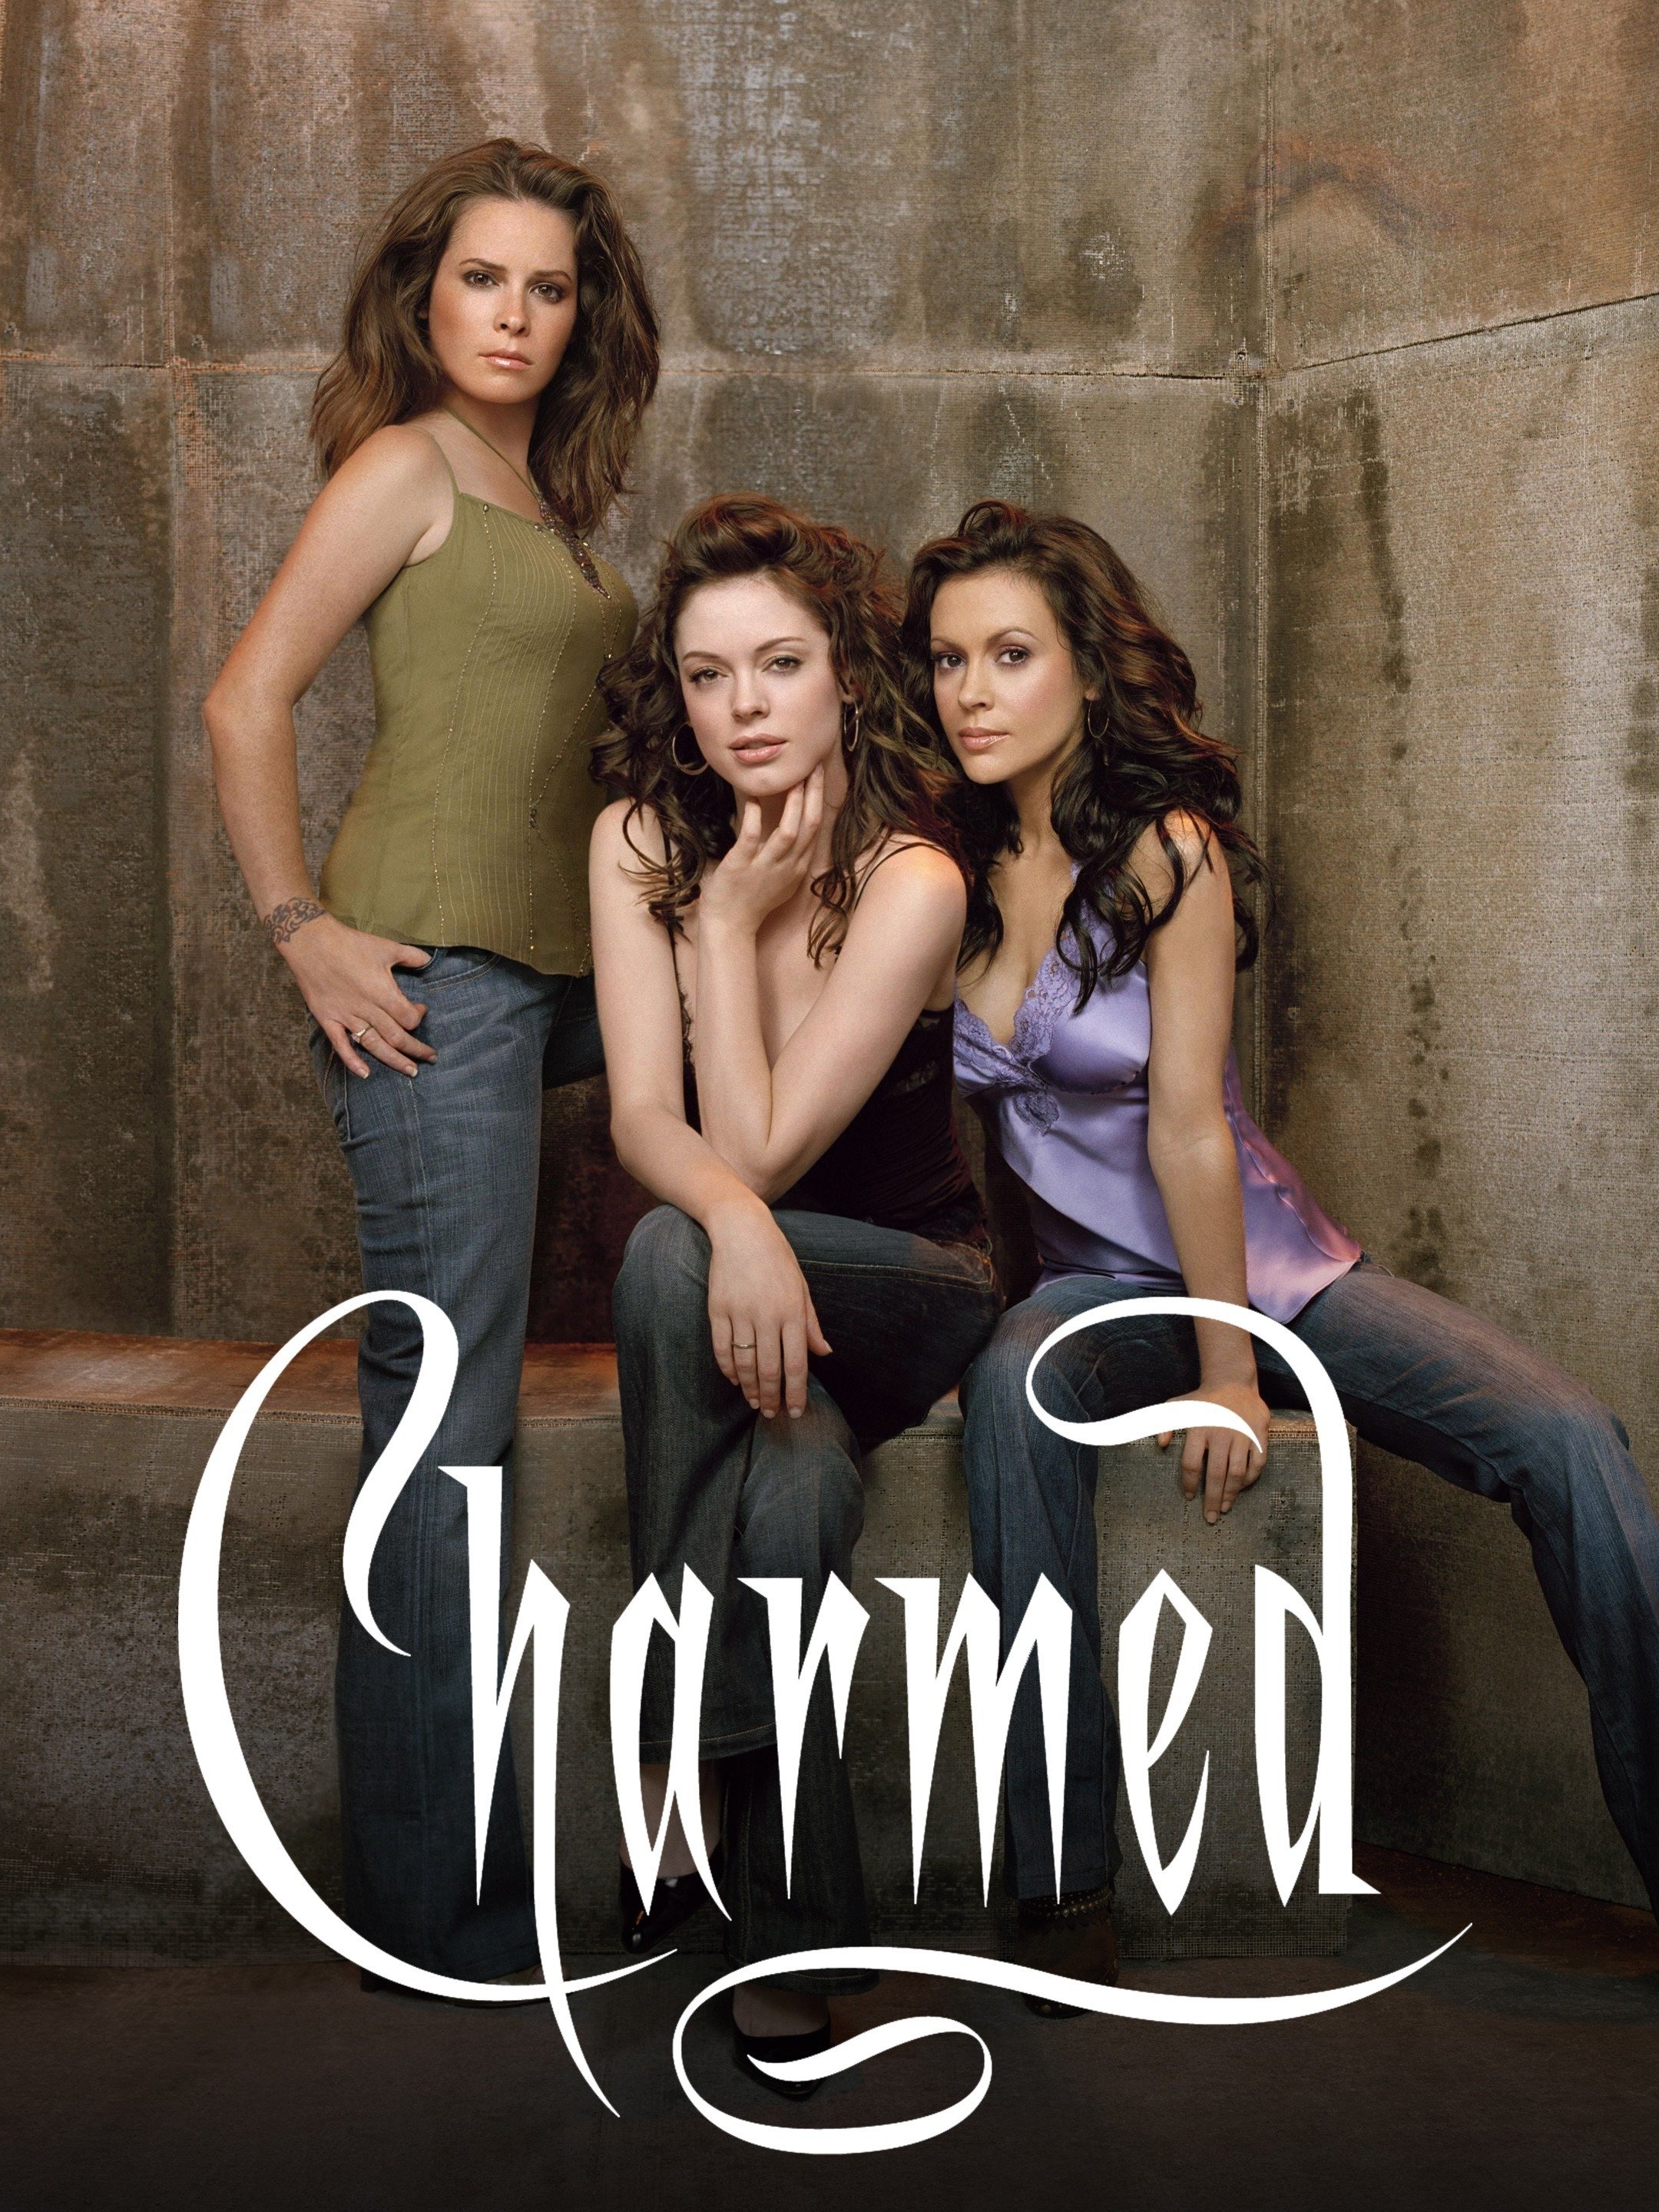 Charmed episodes top TOP 20